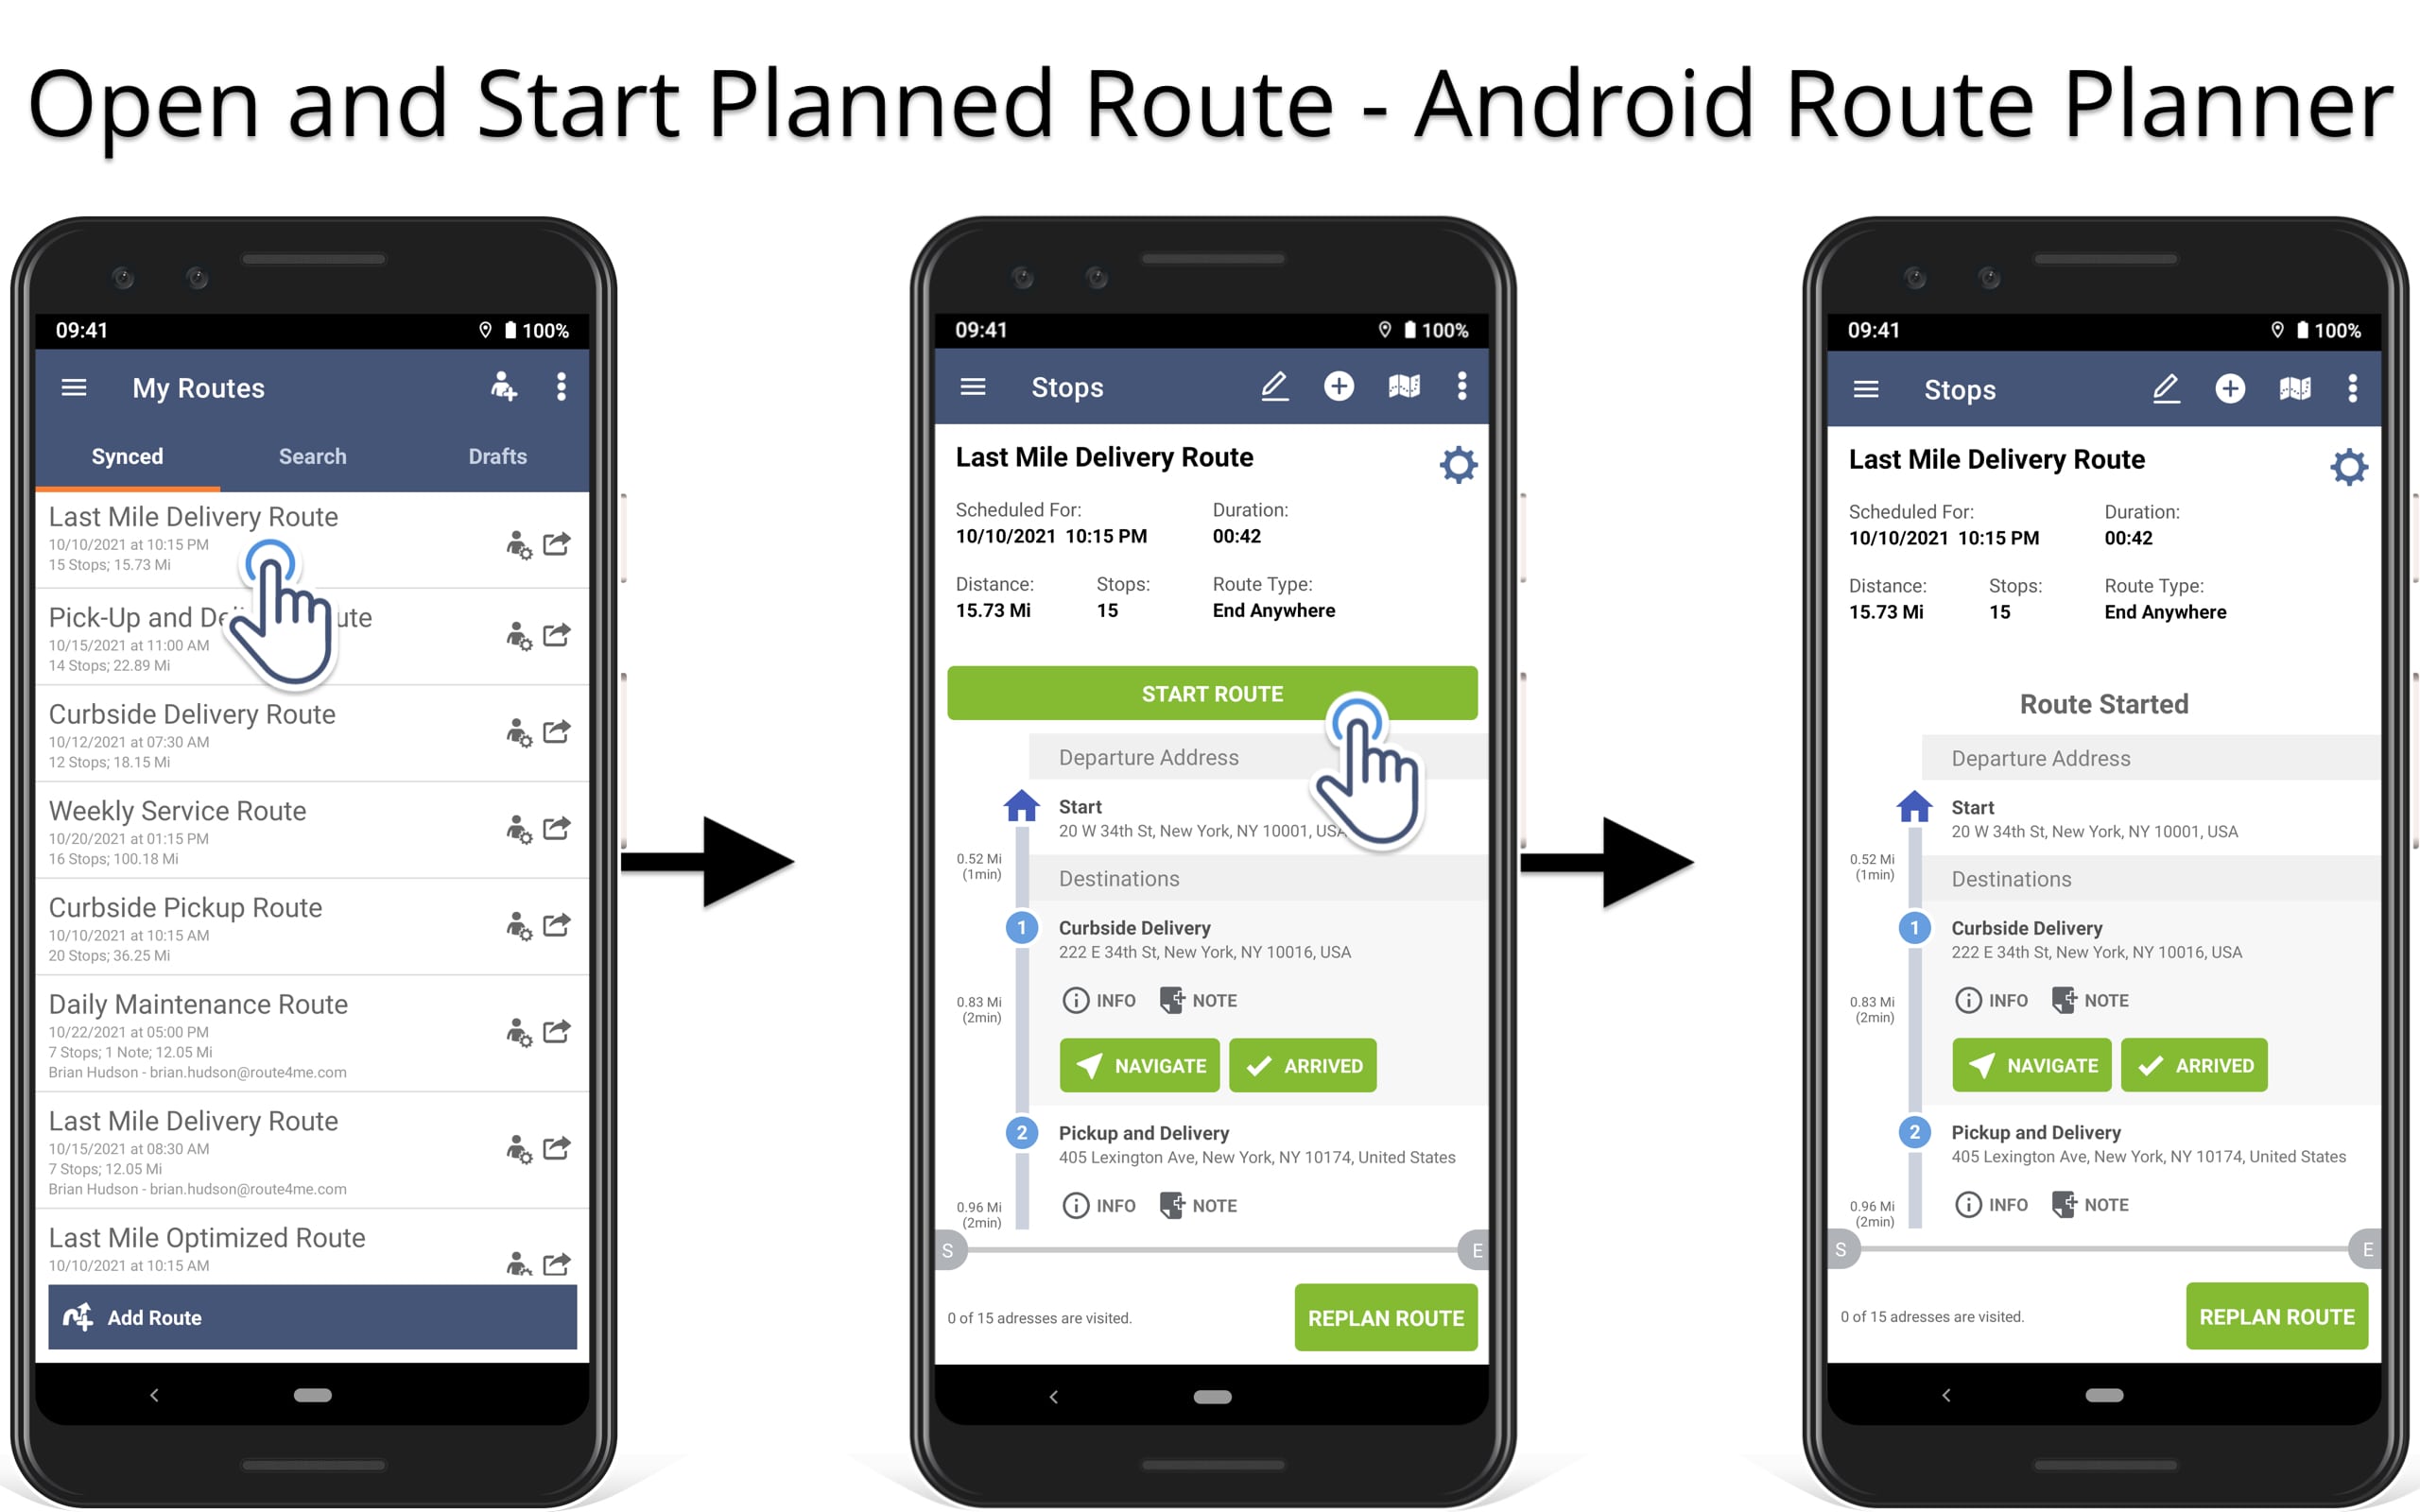 Start delivery route to use mandatory image attachment as POD on Android Route Planner app.